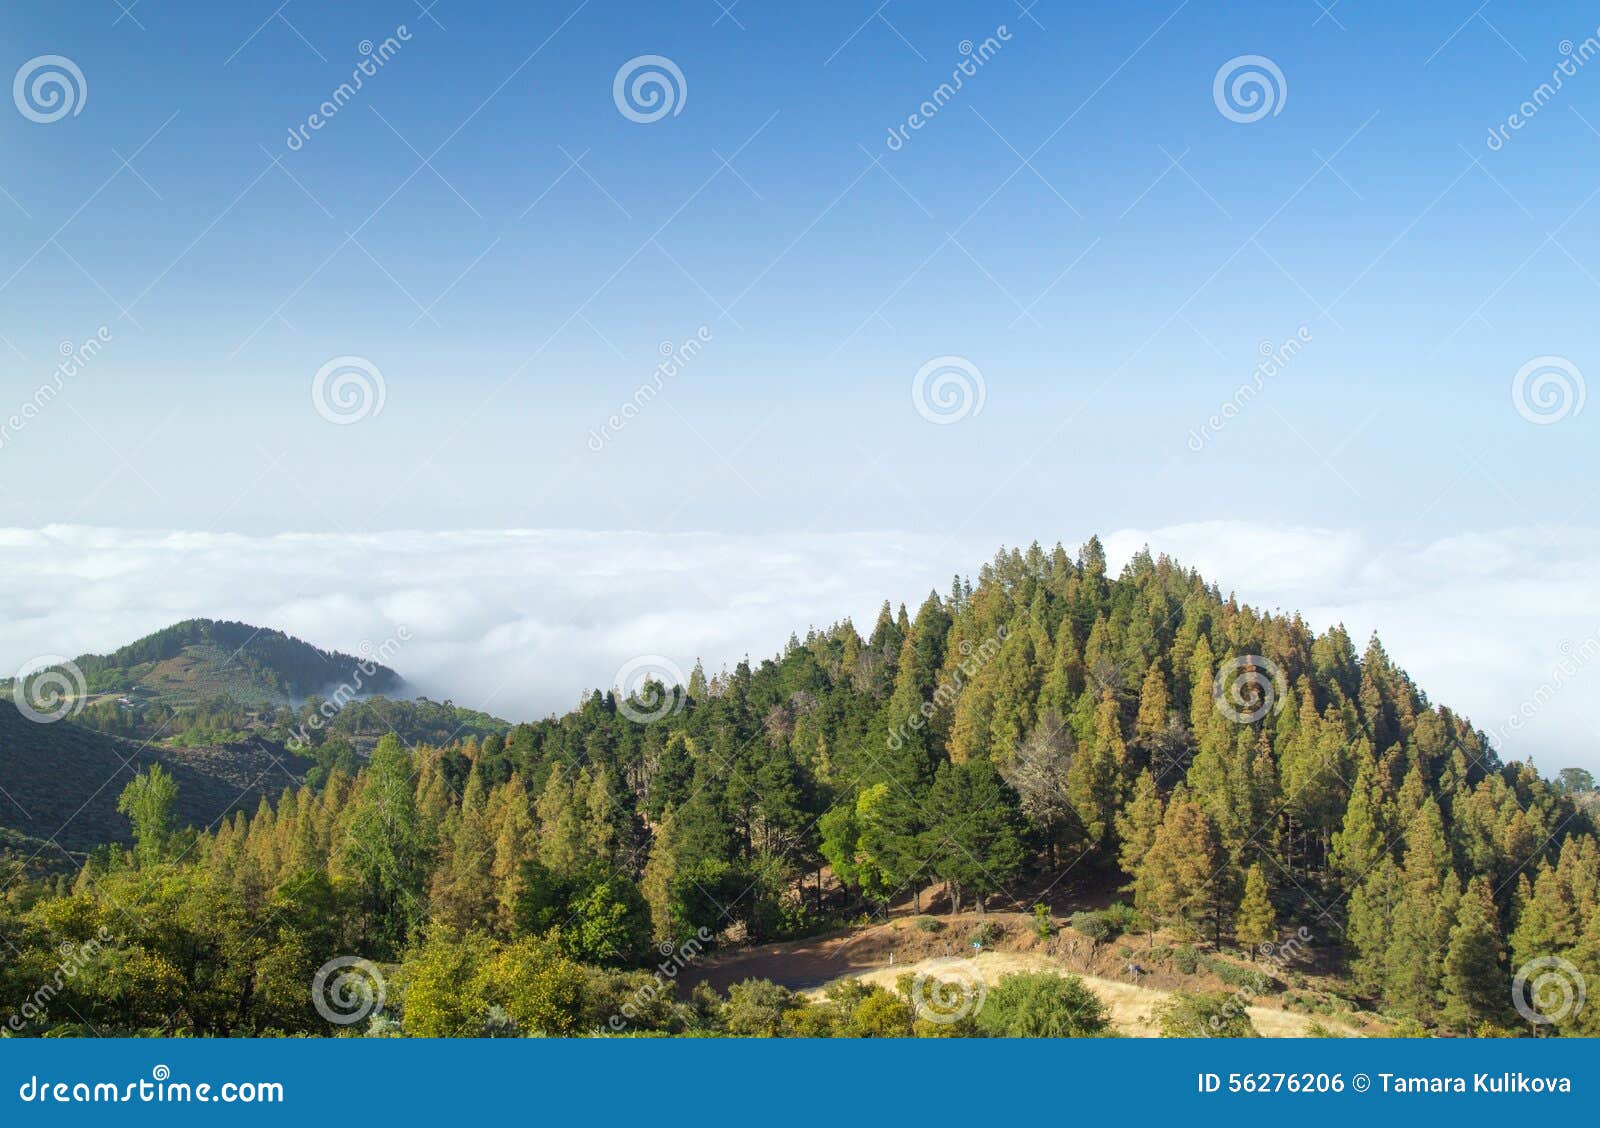 inland gran canaria, view over the tree tops towards cloud cover